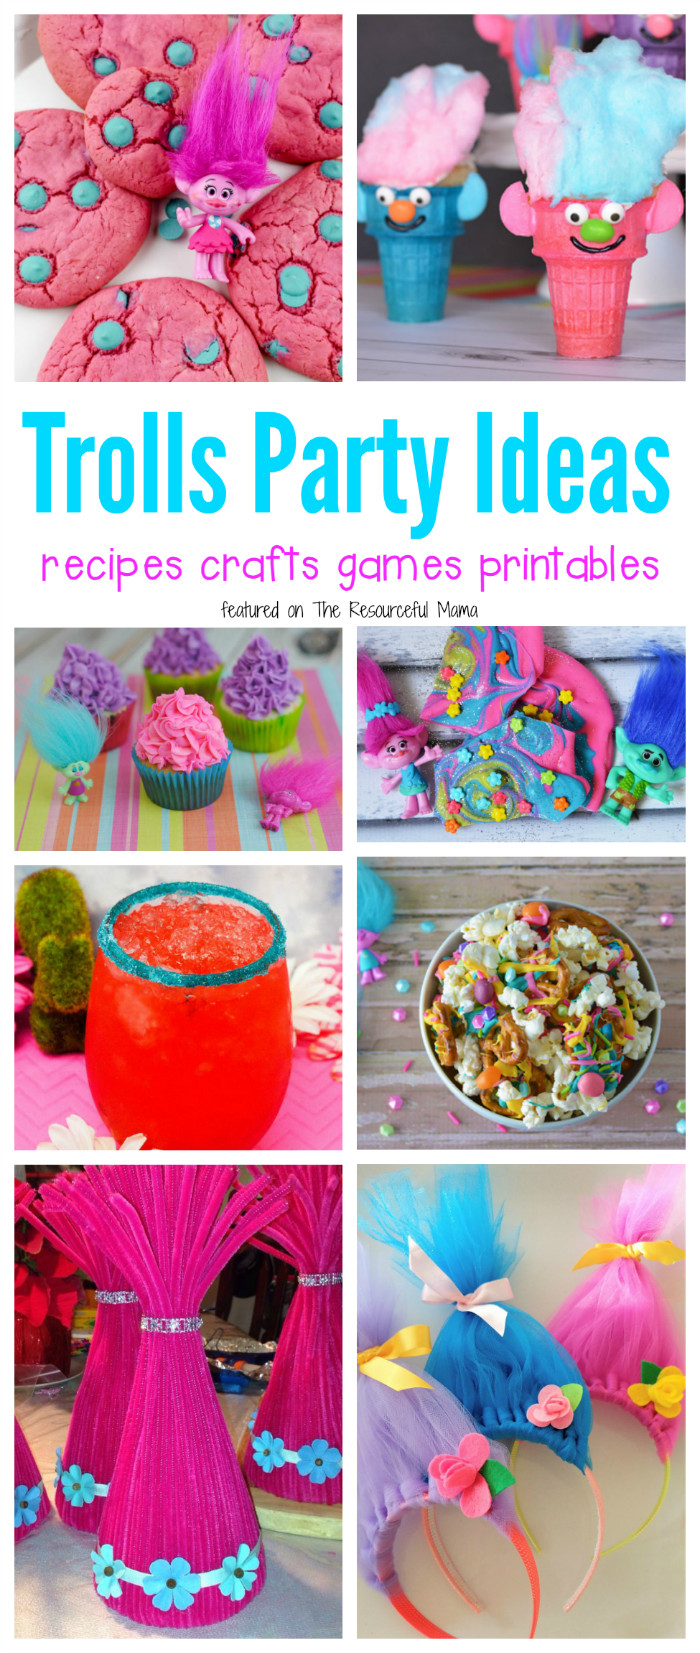 Trolls Party Ideas
 Pin on The Resourceful Mama